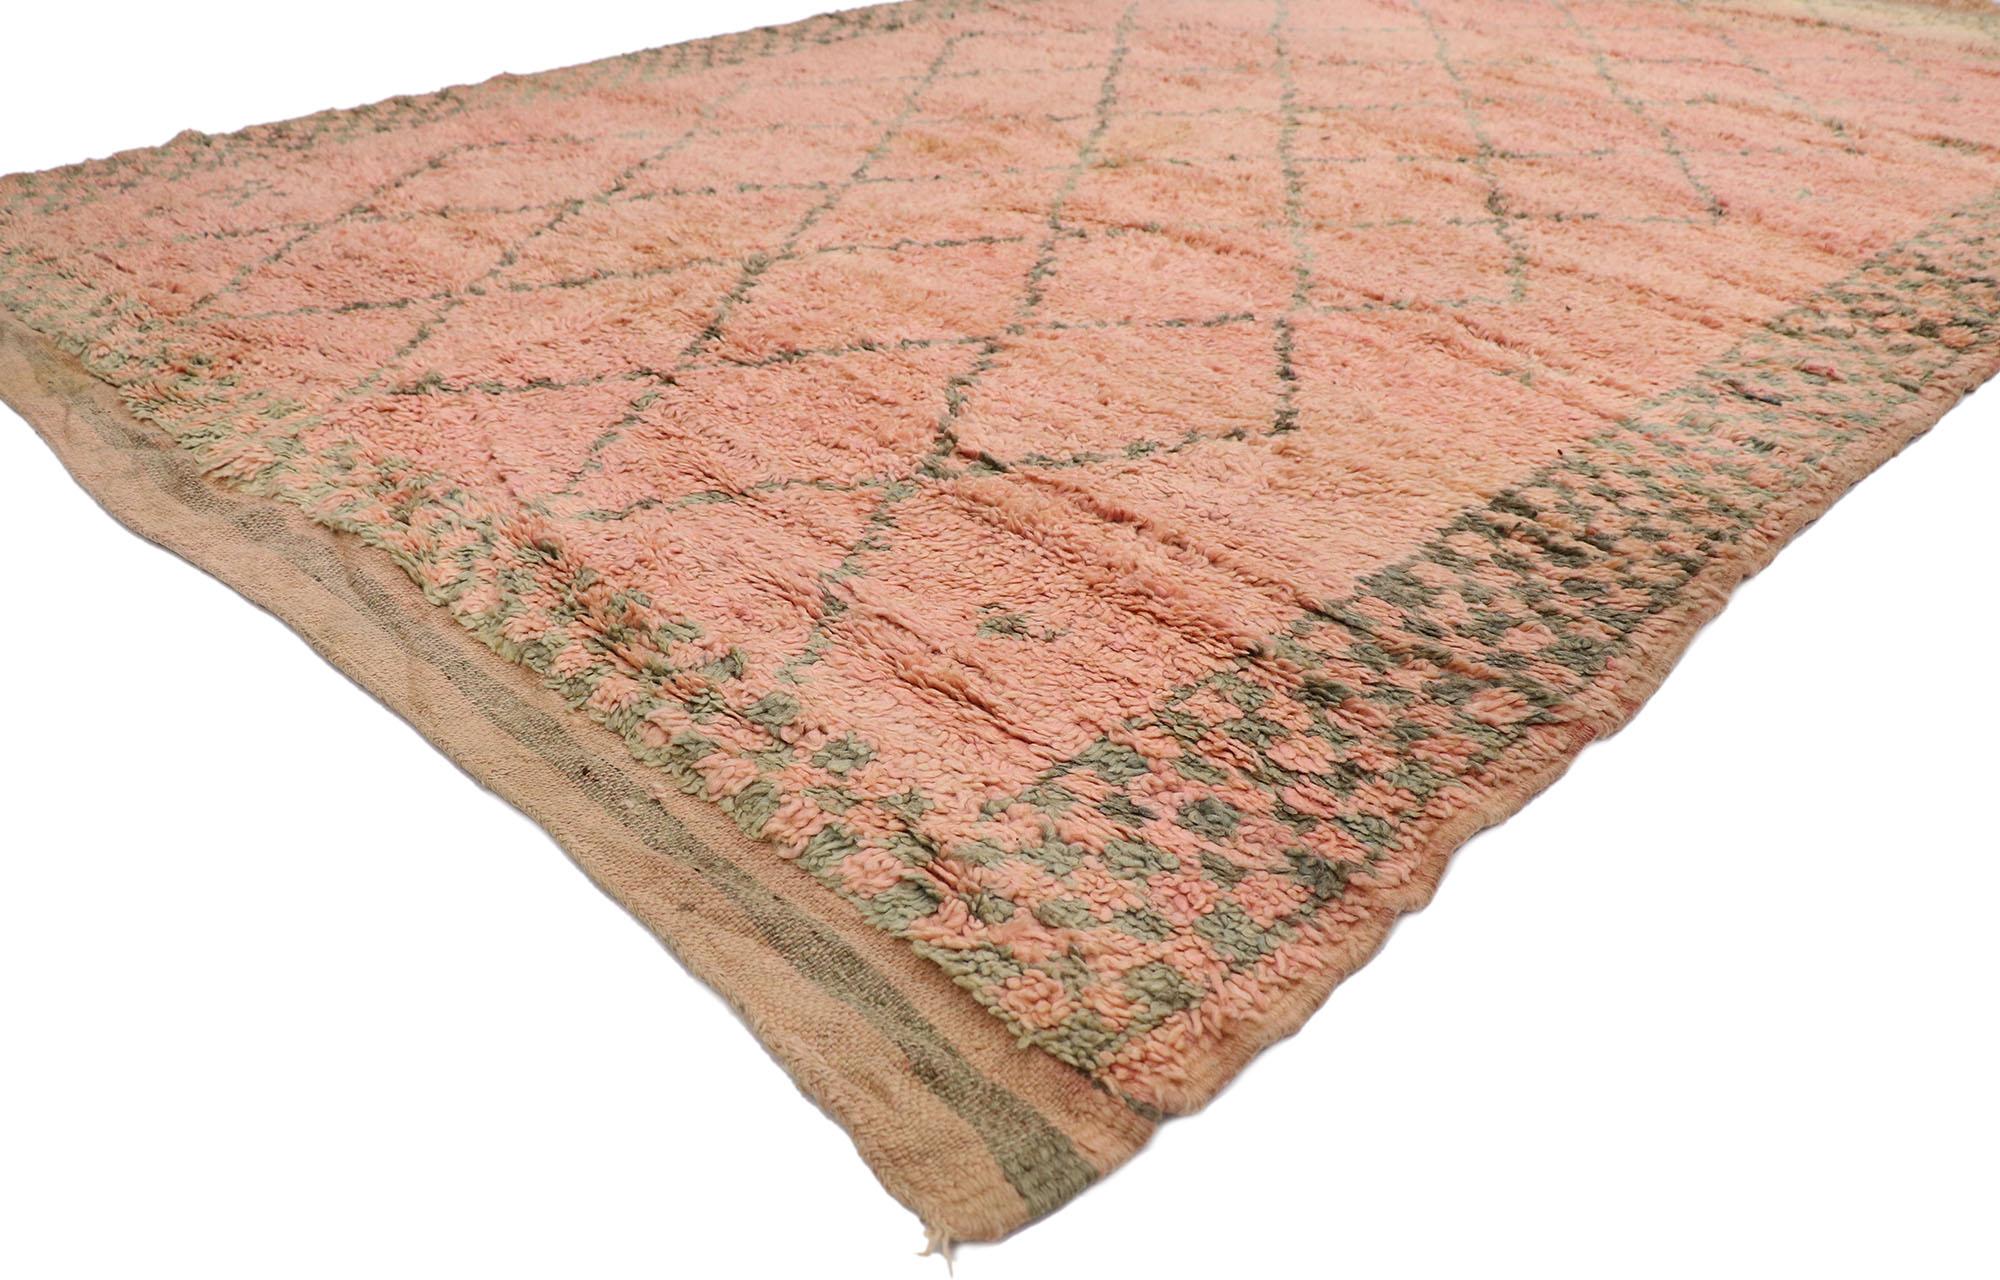 21247 Vintage Berber Moroccan Boujad rug with Bohemian Style 06'03 x 10'01. With its soft colors and diamond lattice, this hand-knotted wool vintage Berber Boujad Moroccan rug beautifully embodies the simplicity of modern Bohemian style. It features